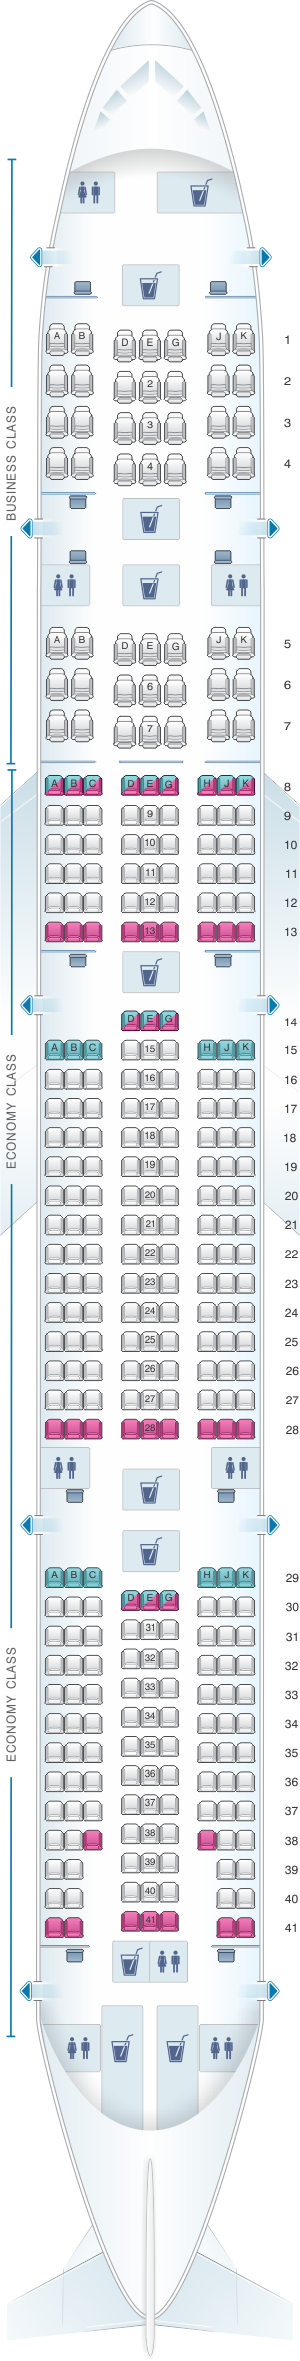 Seat map for Turkish Airlines Boeing B777 300ER